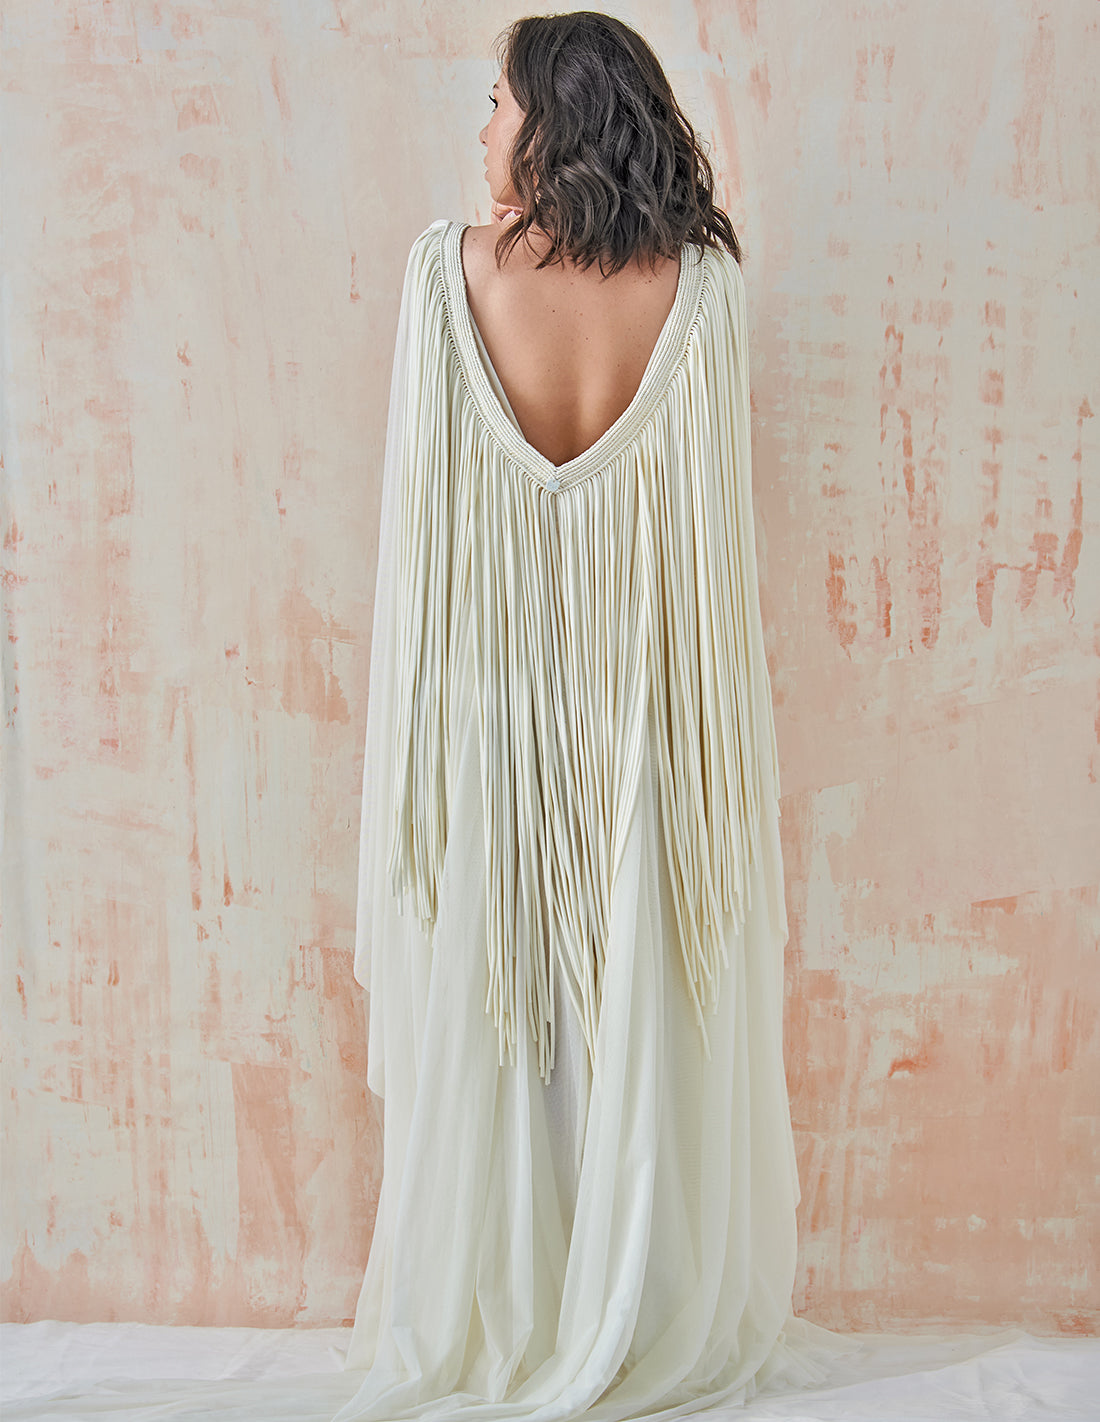 Sublime Cape Ivory. Cape With Hand Woven Macramé In Ivory. Entreaguas